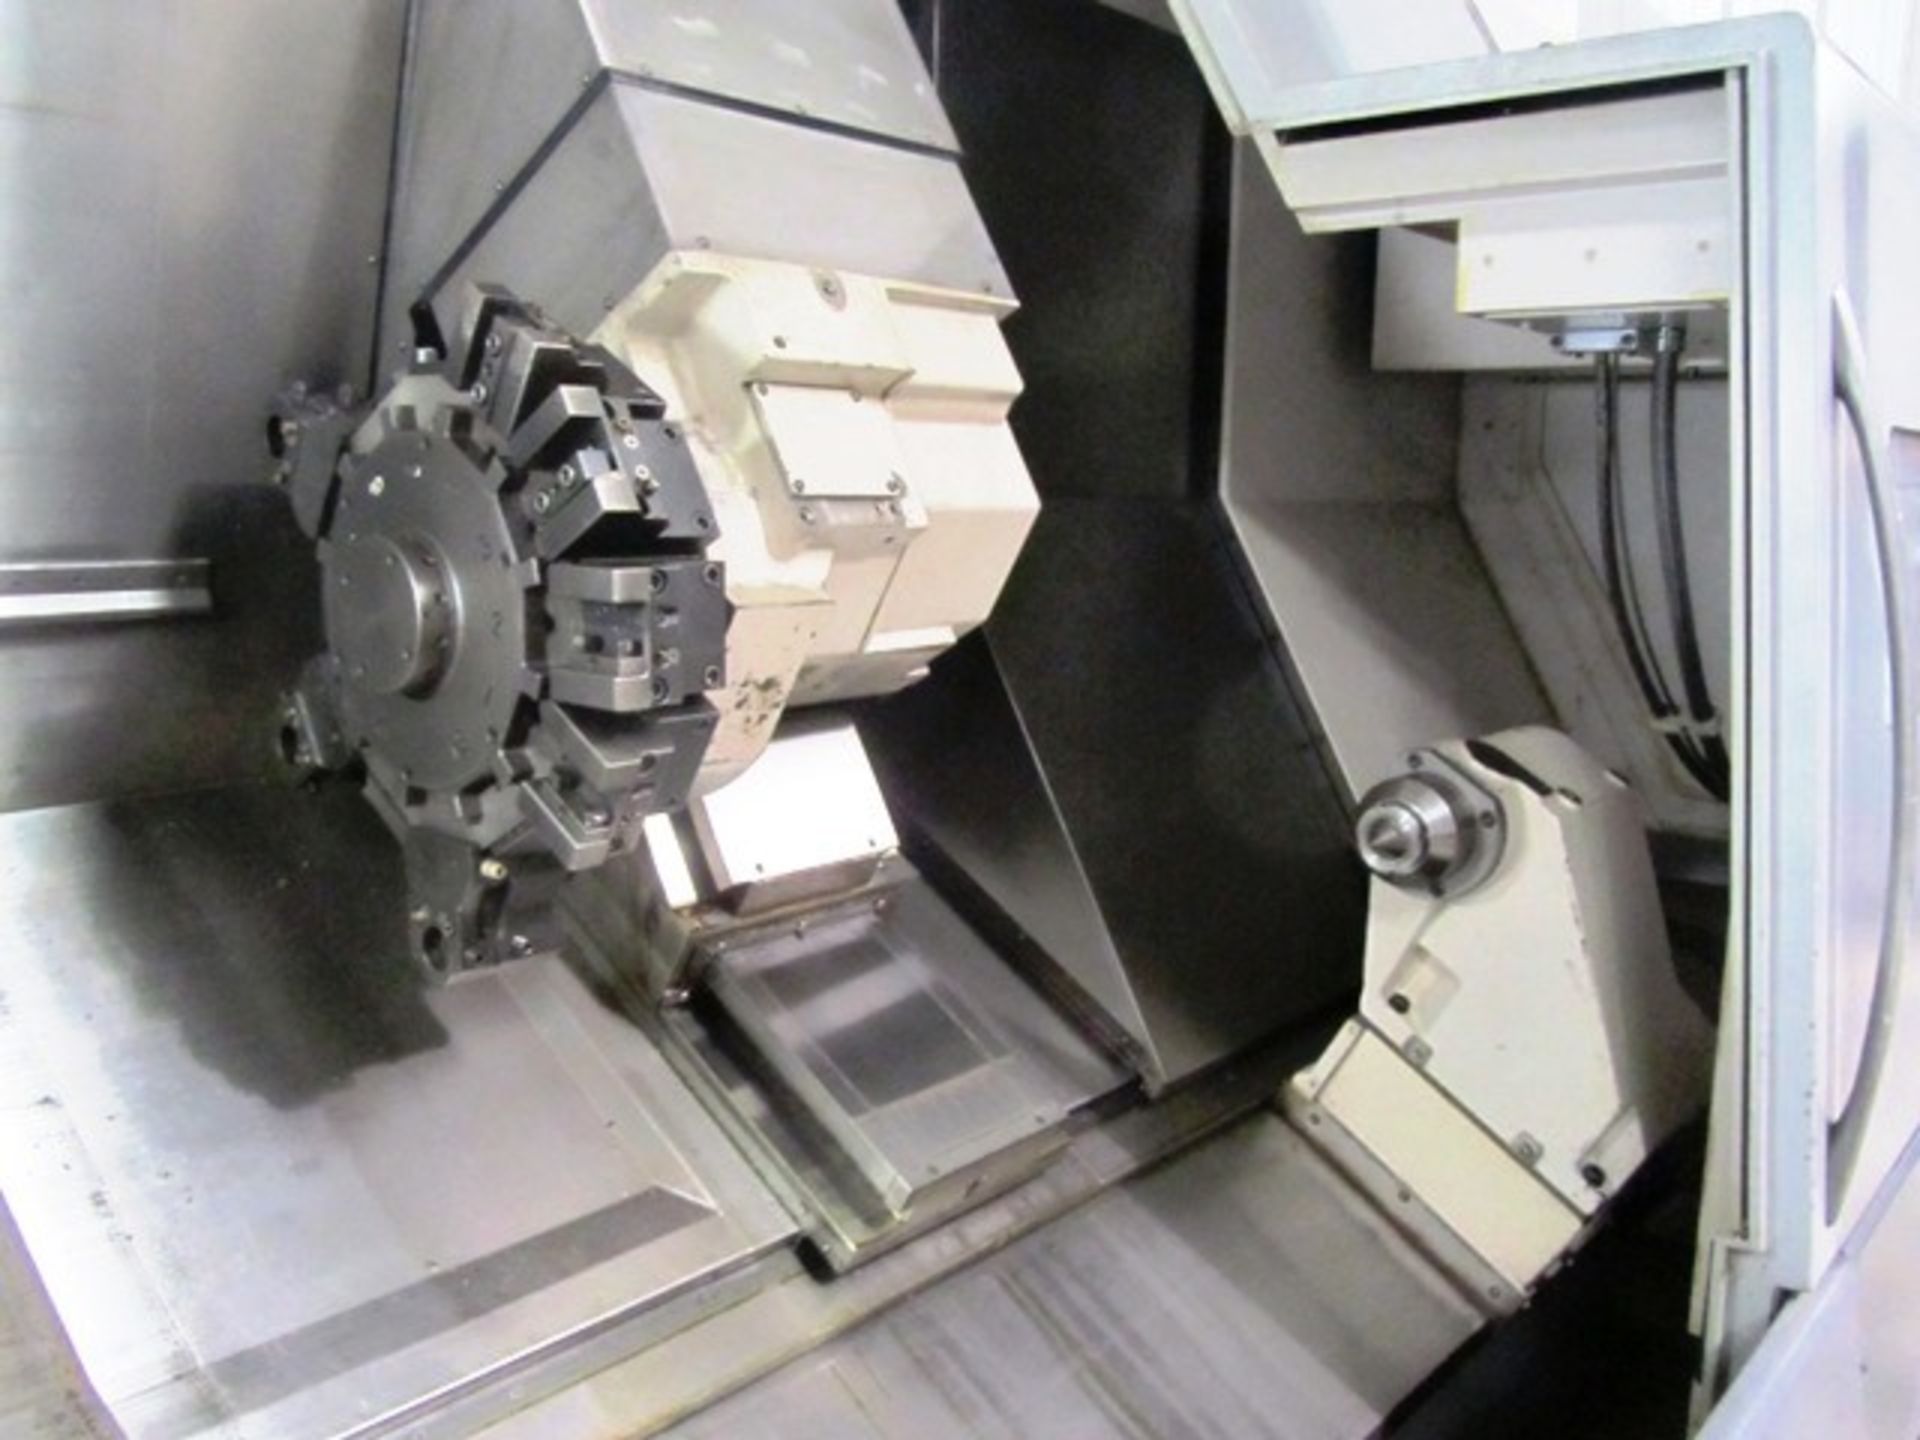 Okuma Space Turn Model LB4000EX - MY C1500 CNC Turning Center with Y-Axis, Milling, C-Axis, 15'' 3- - Image 3 of 6